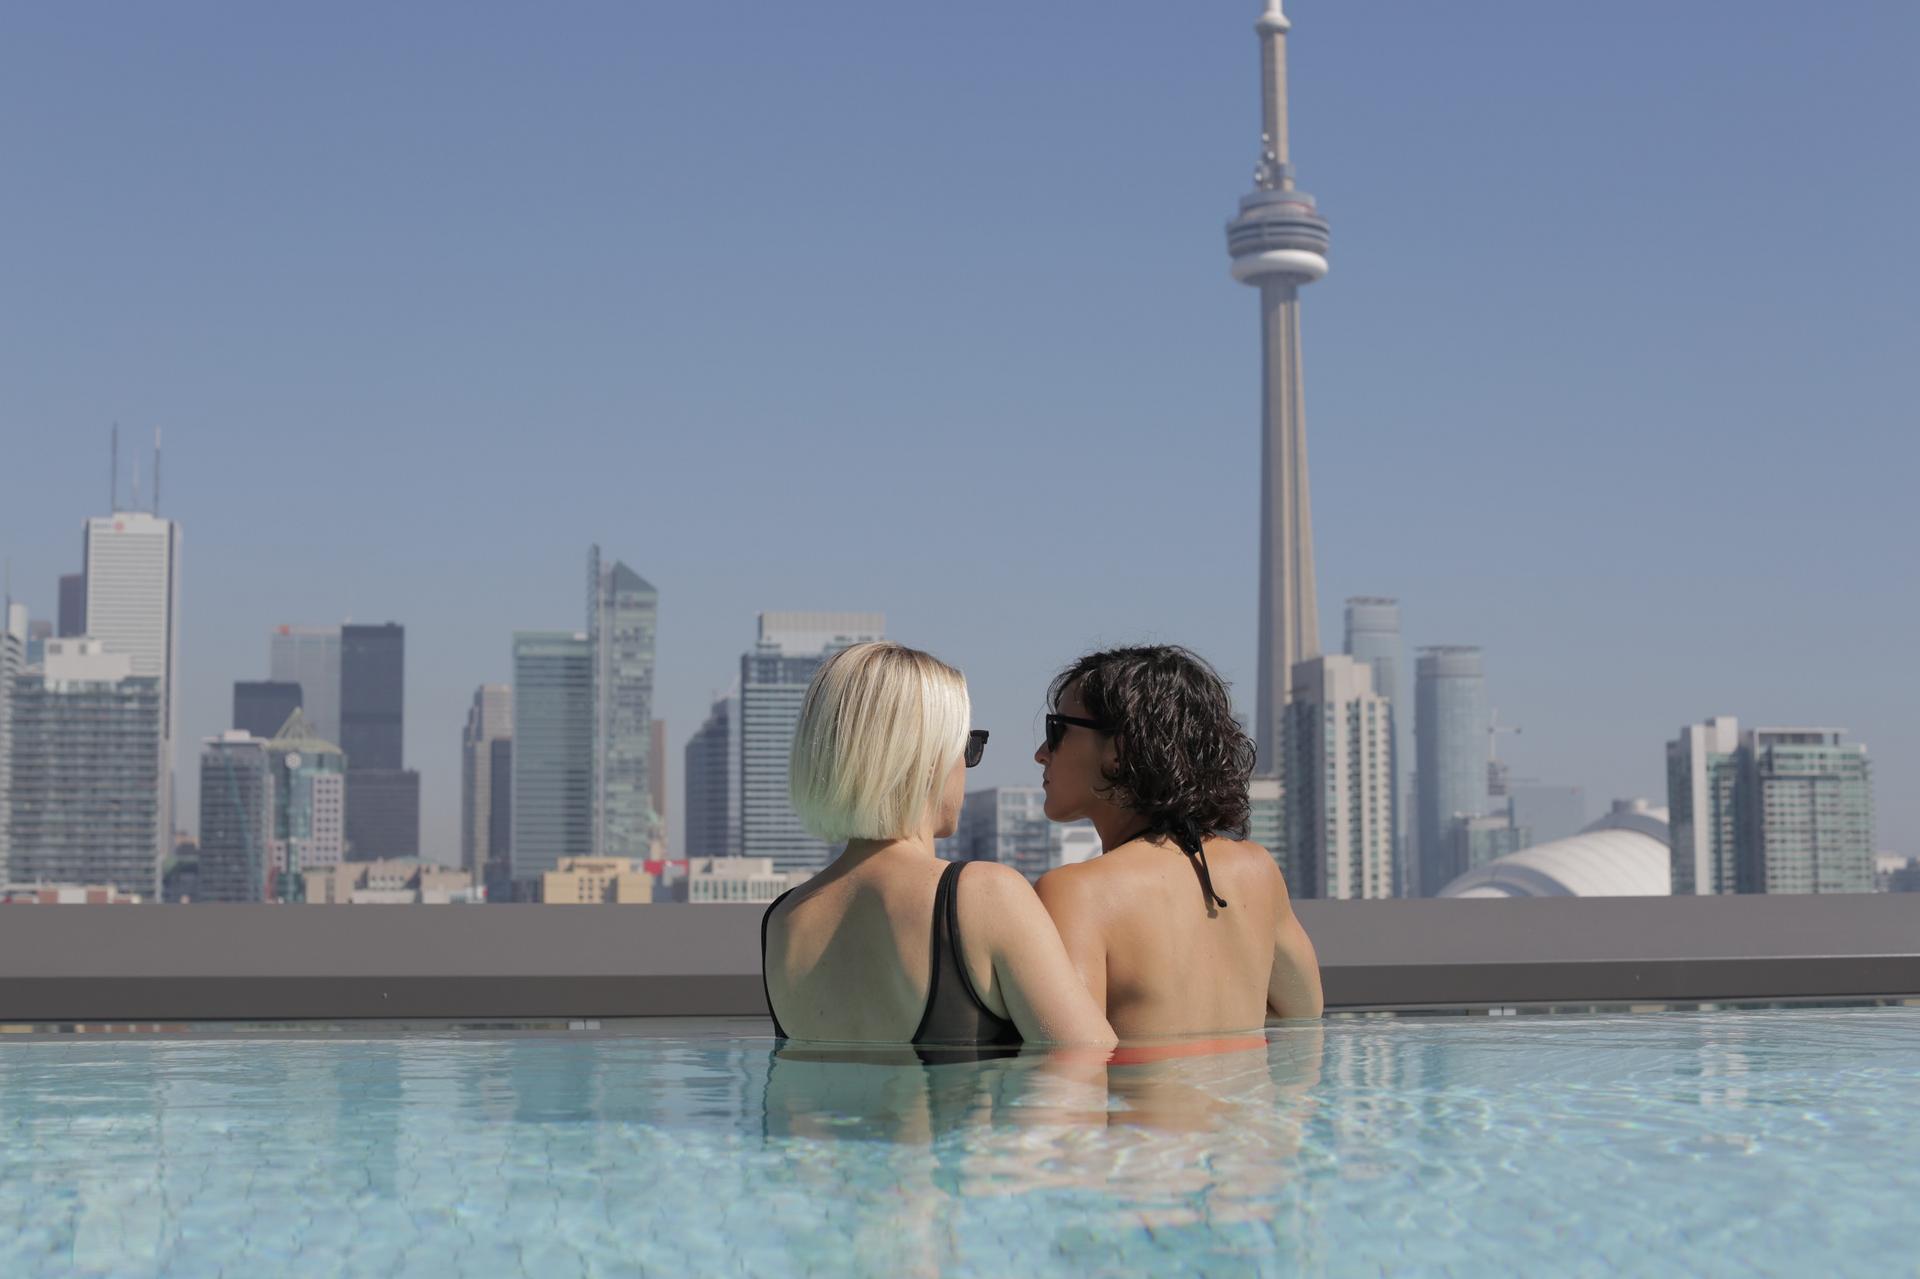 A lesbian couple relaxes in a pool by the CN tower